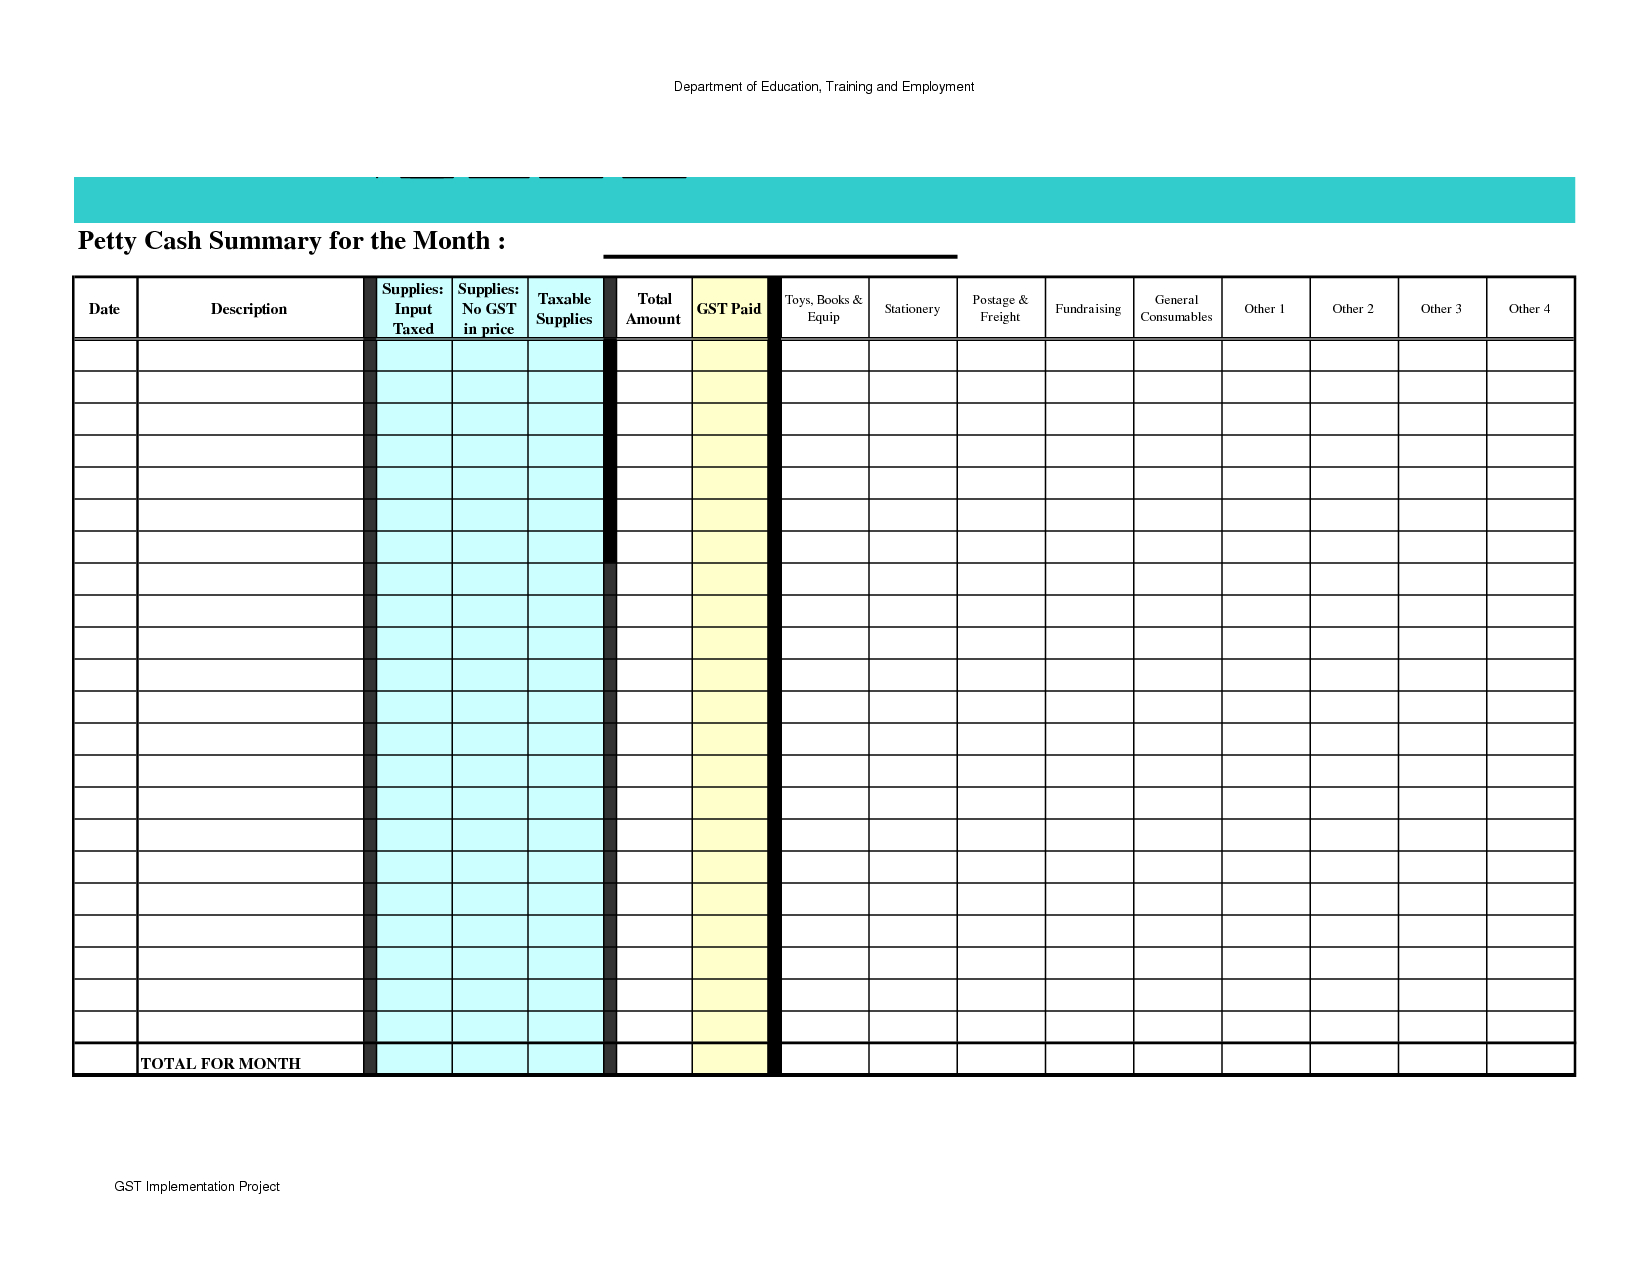 Petty Cash Spreadsheet Template Excel | Petty Cash Expences With Regard To Petty Cash Expense Report Template